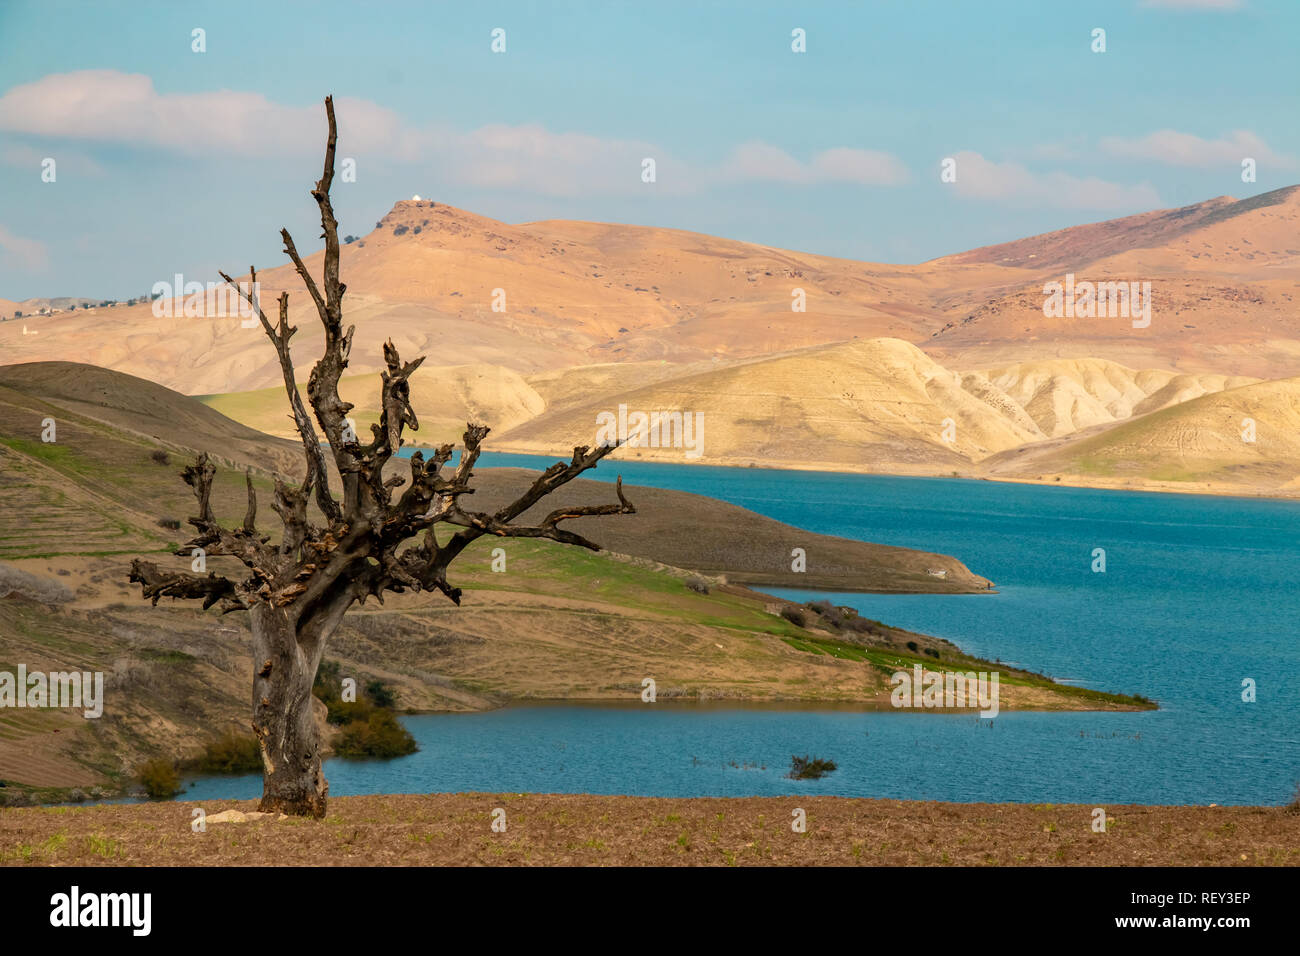 A dry tree near a lake in the desert Stock Photo